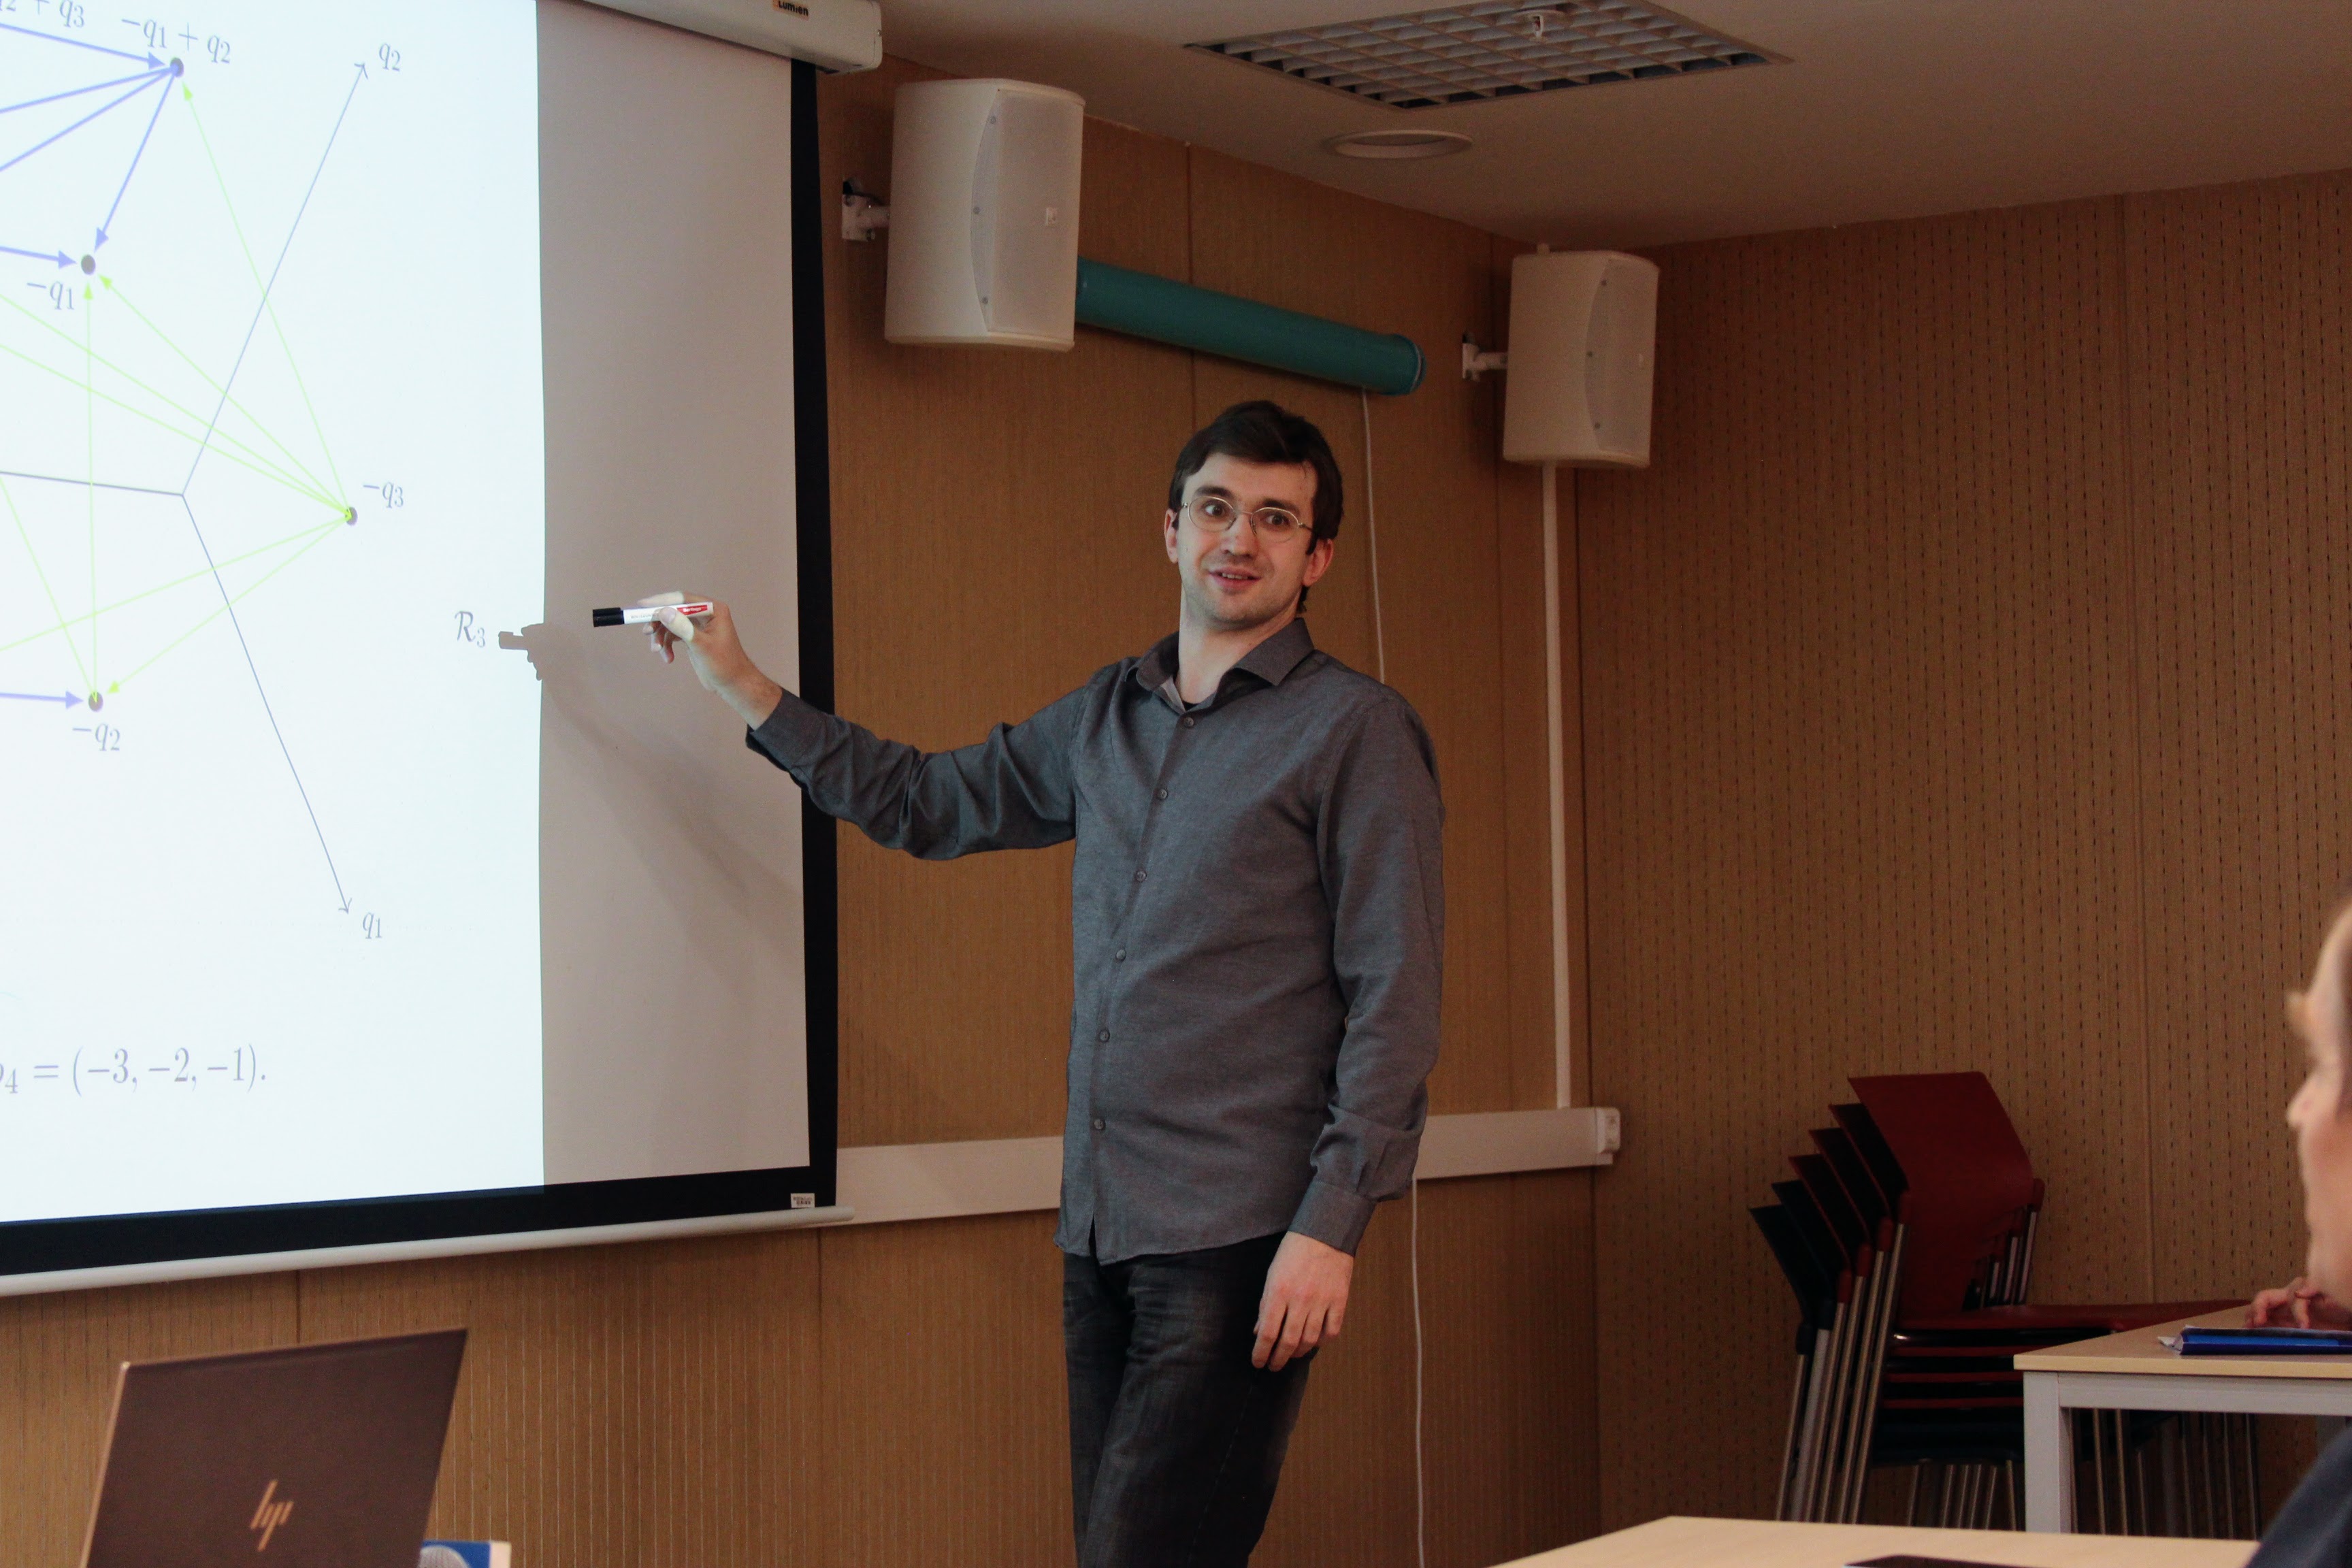 Alexander Perepechko at X school-conference "Lie algebras, algebraic groups and invariant theory", HSE University, Moscow, January 2023